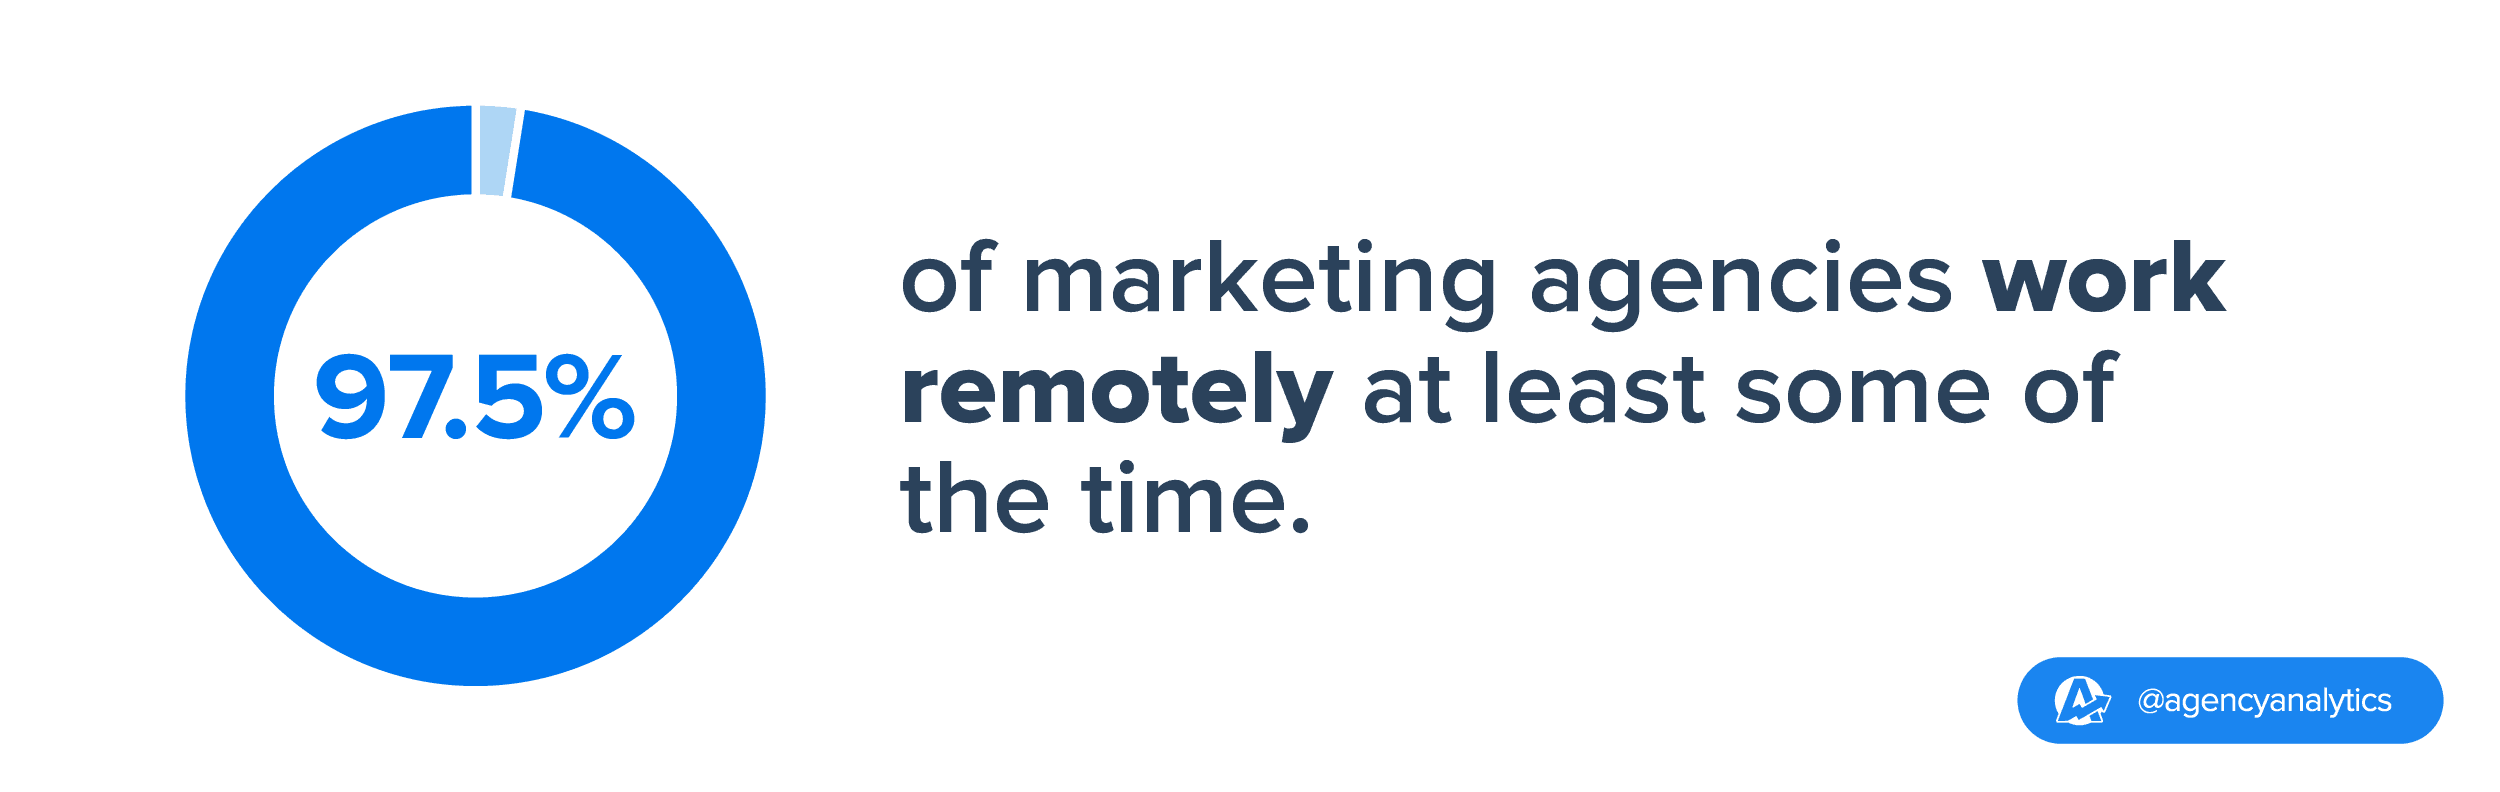 stat showing remote work habits in marketing agencies